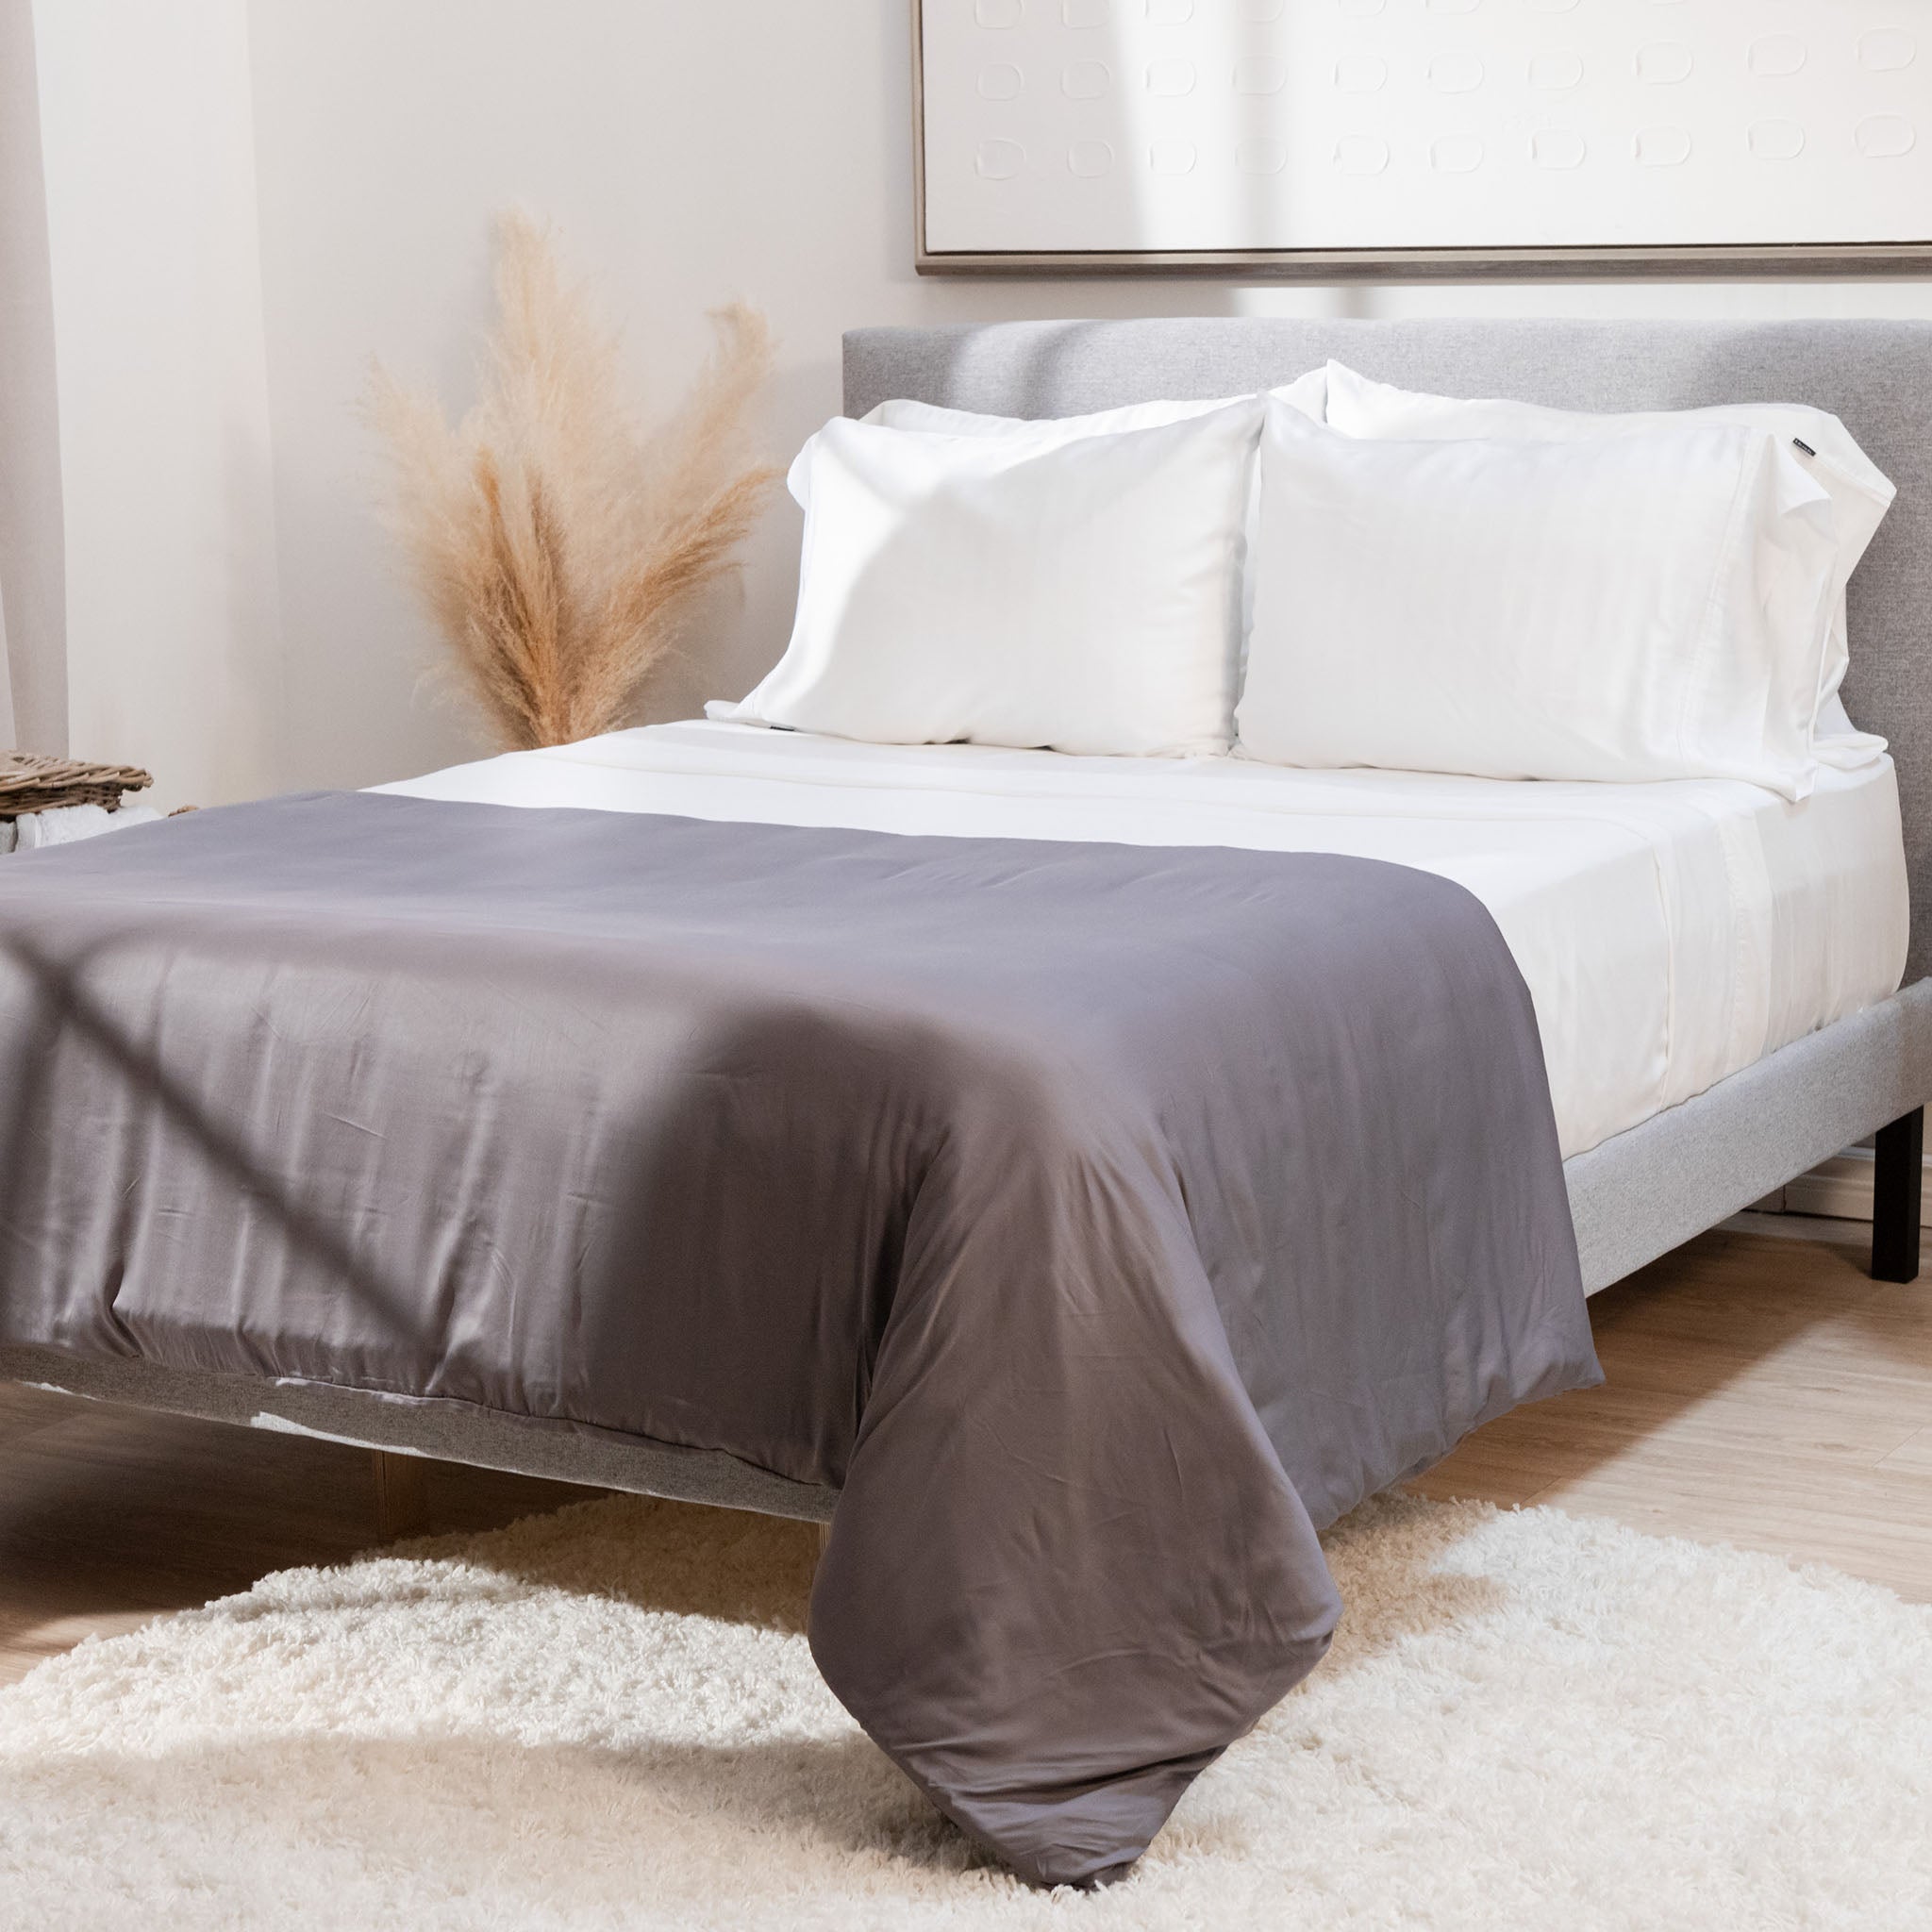 Bedding - Free Shipping - Easy Returns and Refunds - Hush